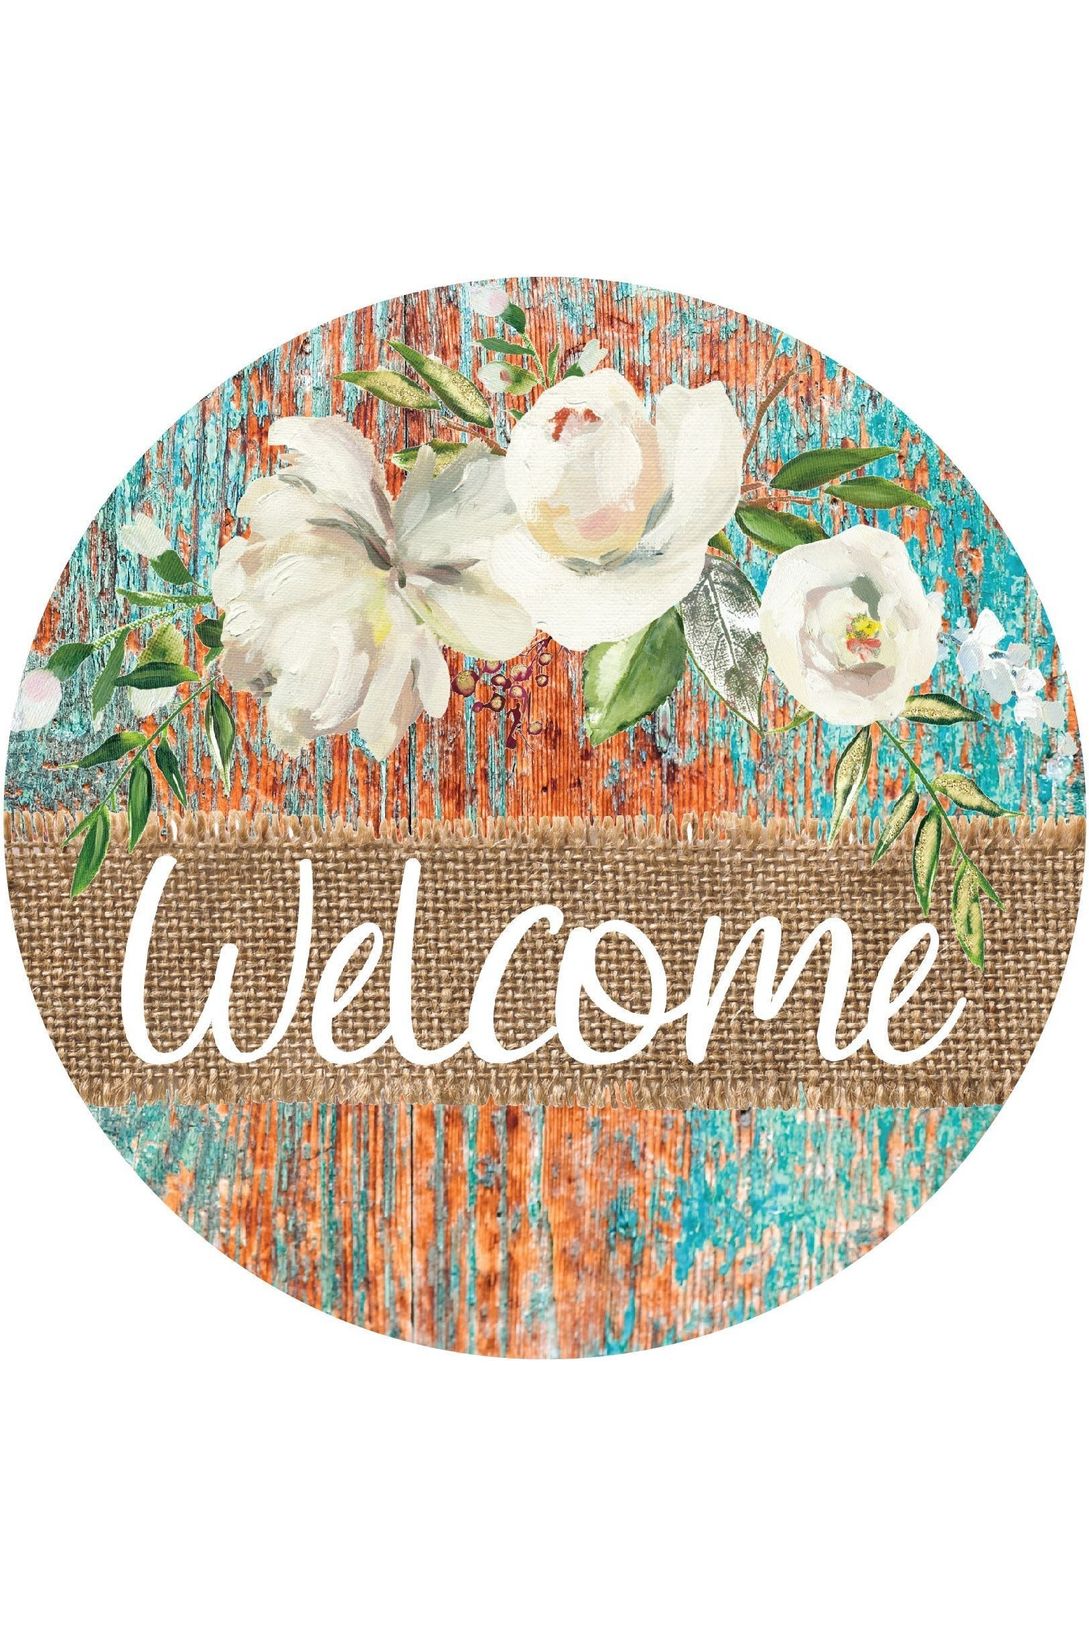 Shop For Welcome Round Floral Rustic Sign - Wreath Enhancement